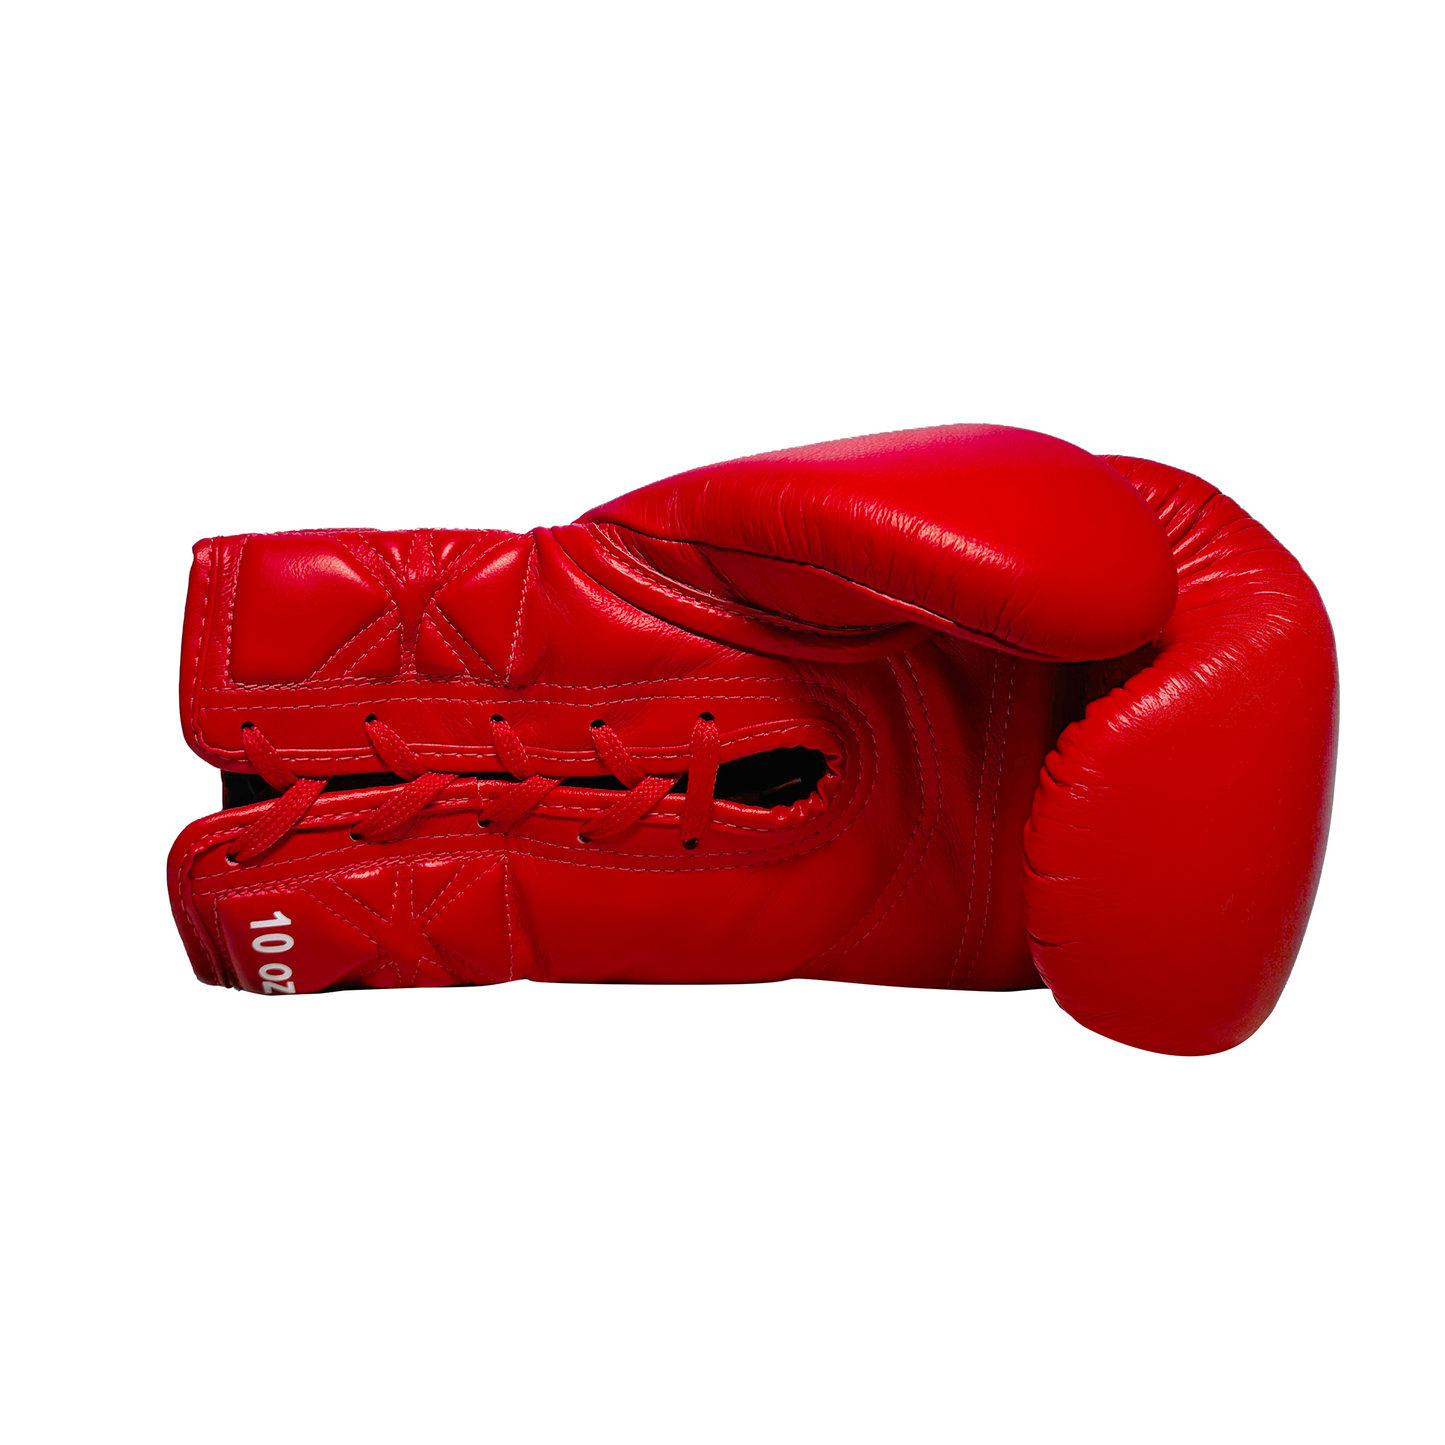 Top King Boxhandschuhe "Super Competition" Red